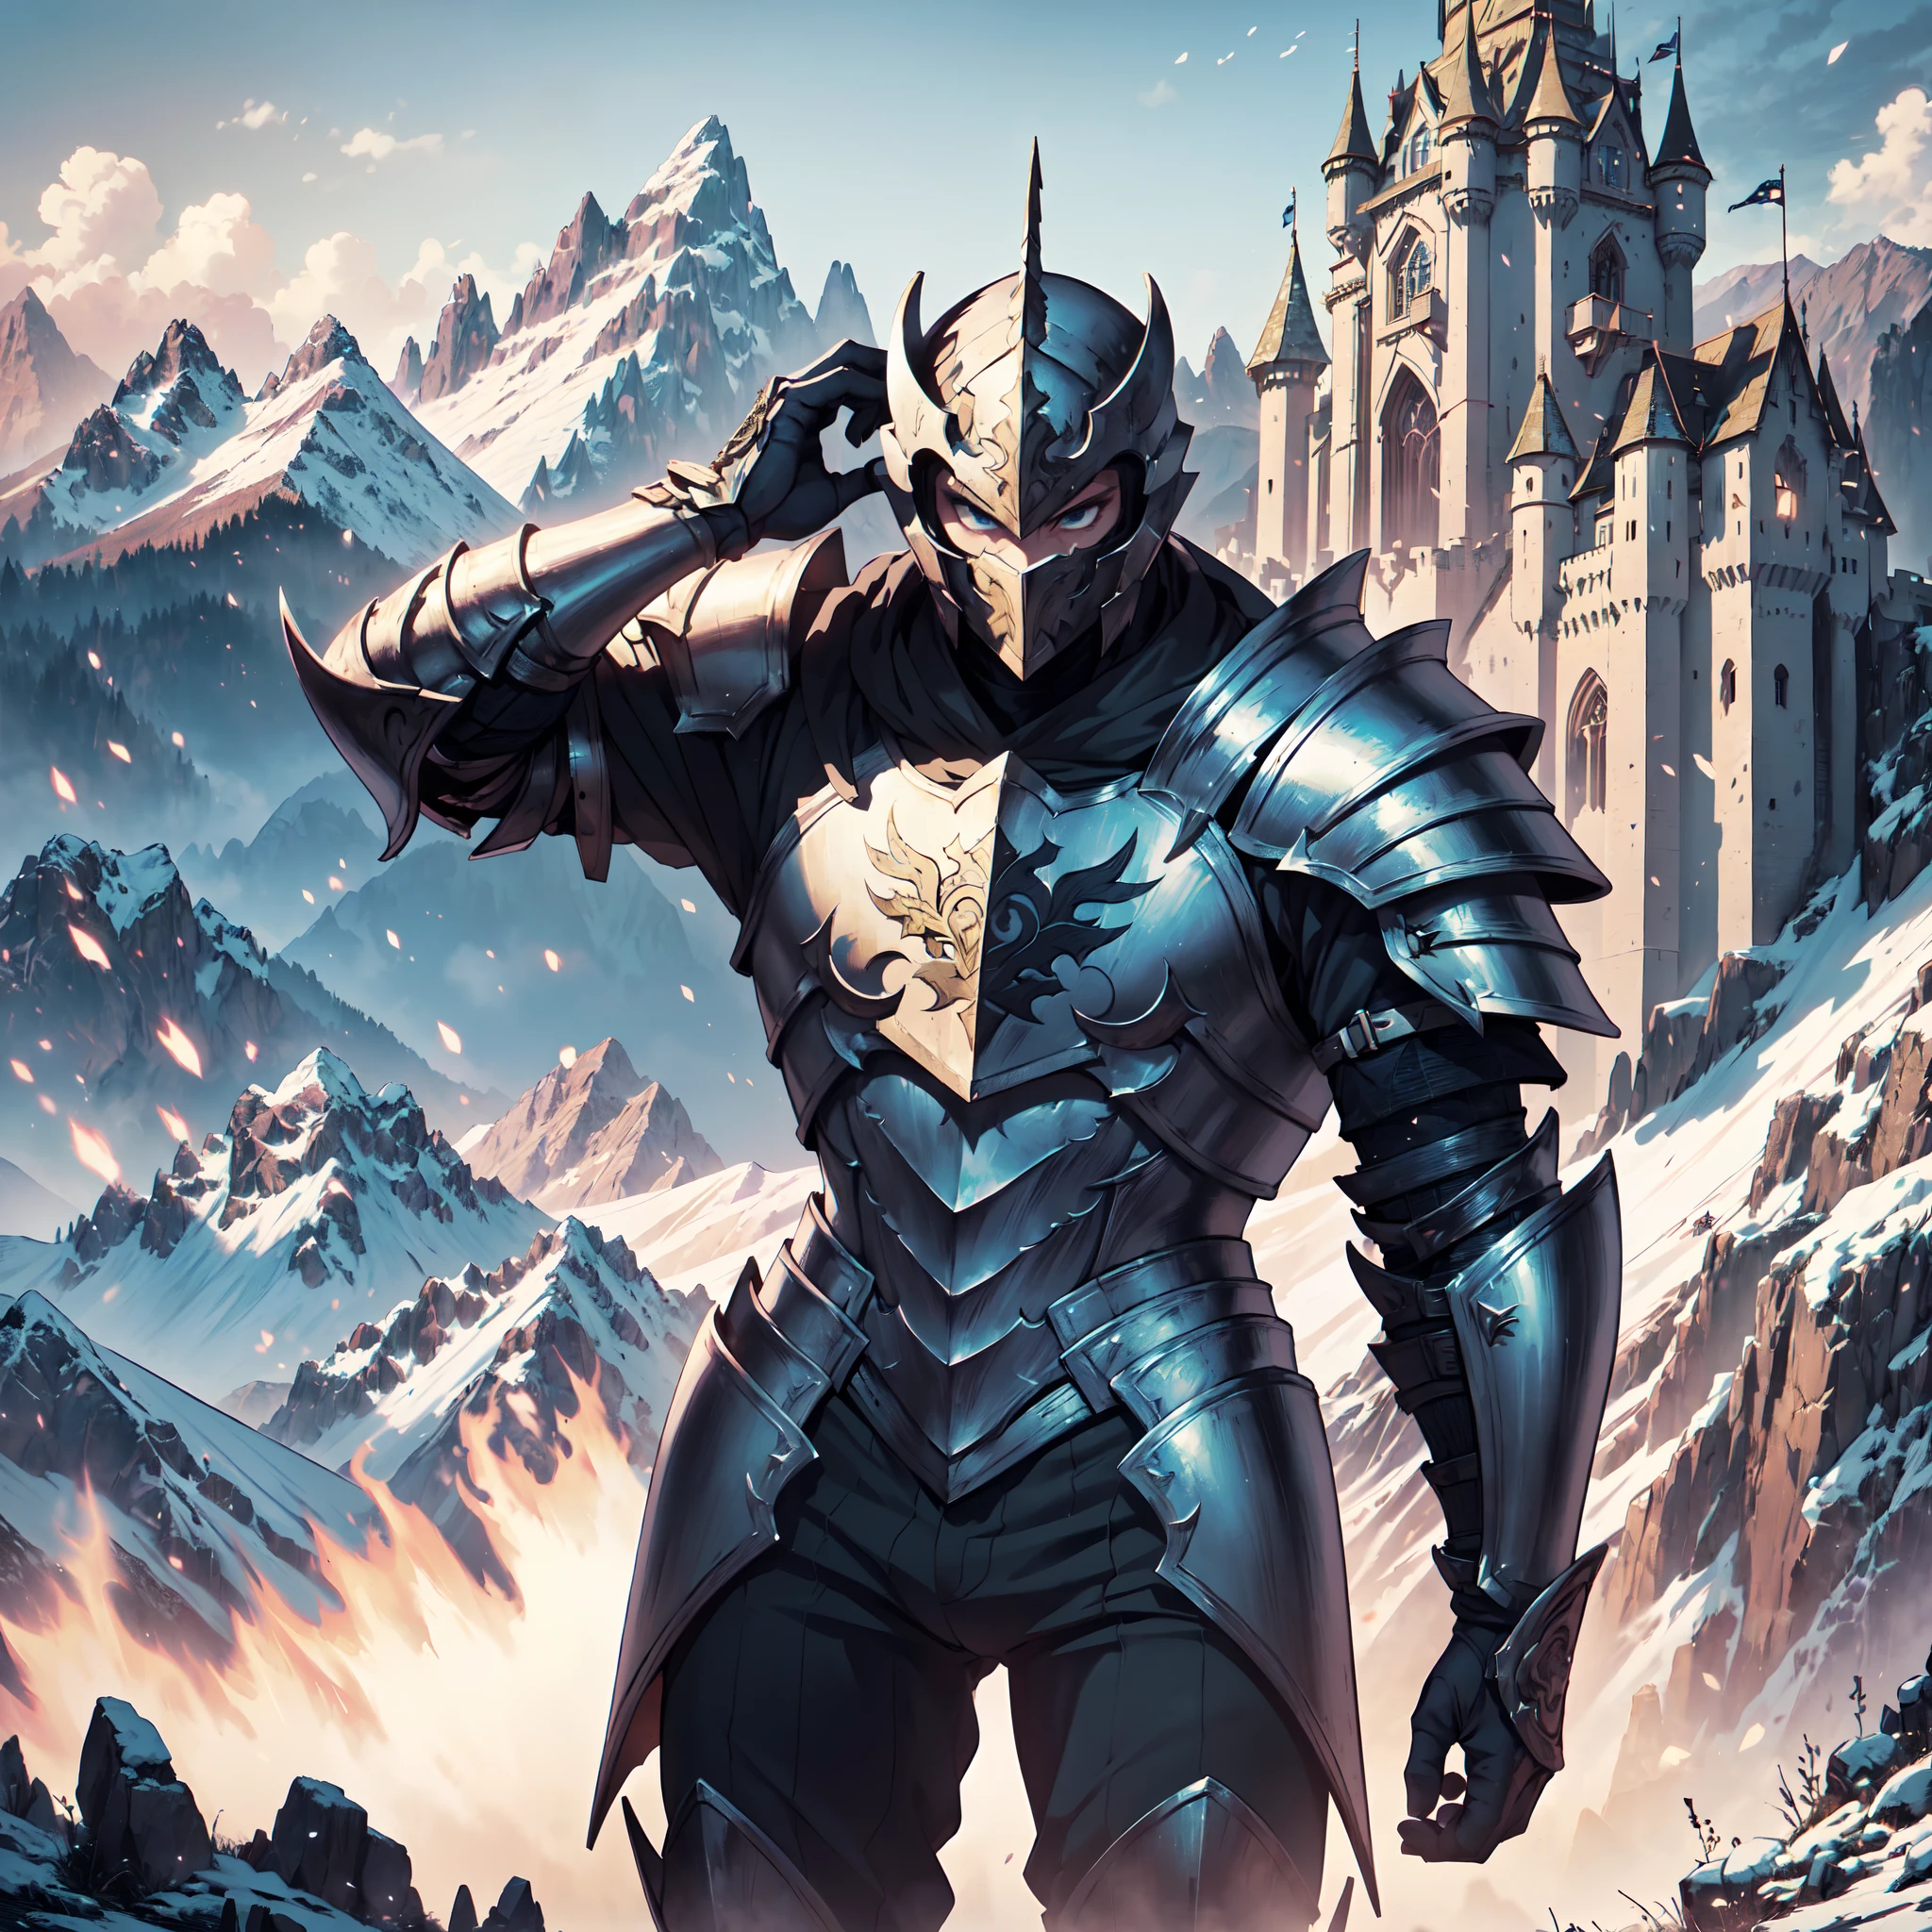 128K Resolution,
Ultra High Definition,
Best Quality,
Hyper Detailed,
Masterpiece,
Anime,
Body Shot,
1 Boy,
Handsome,
Hyper Detailed Short Hair,
(((Hyper Detailed Armor Plates))),
(((Hyper Detailed Undershirt))),
(((Hyper Detailed Baron Armor))),
(((Mountain Castle Background Scenery))),